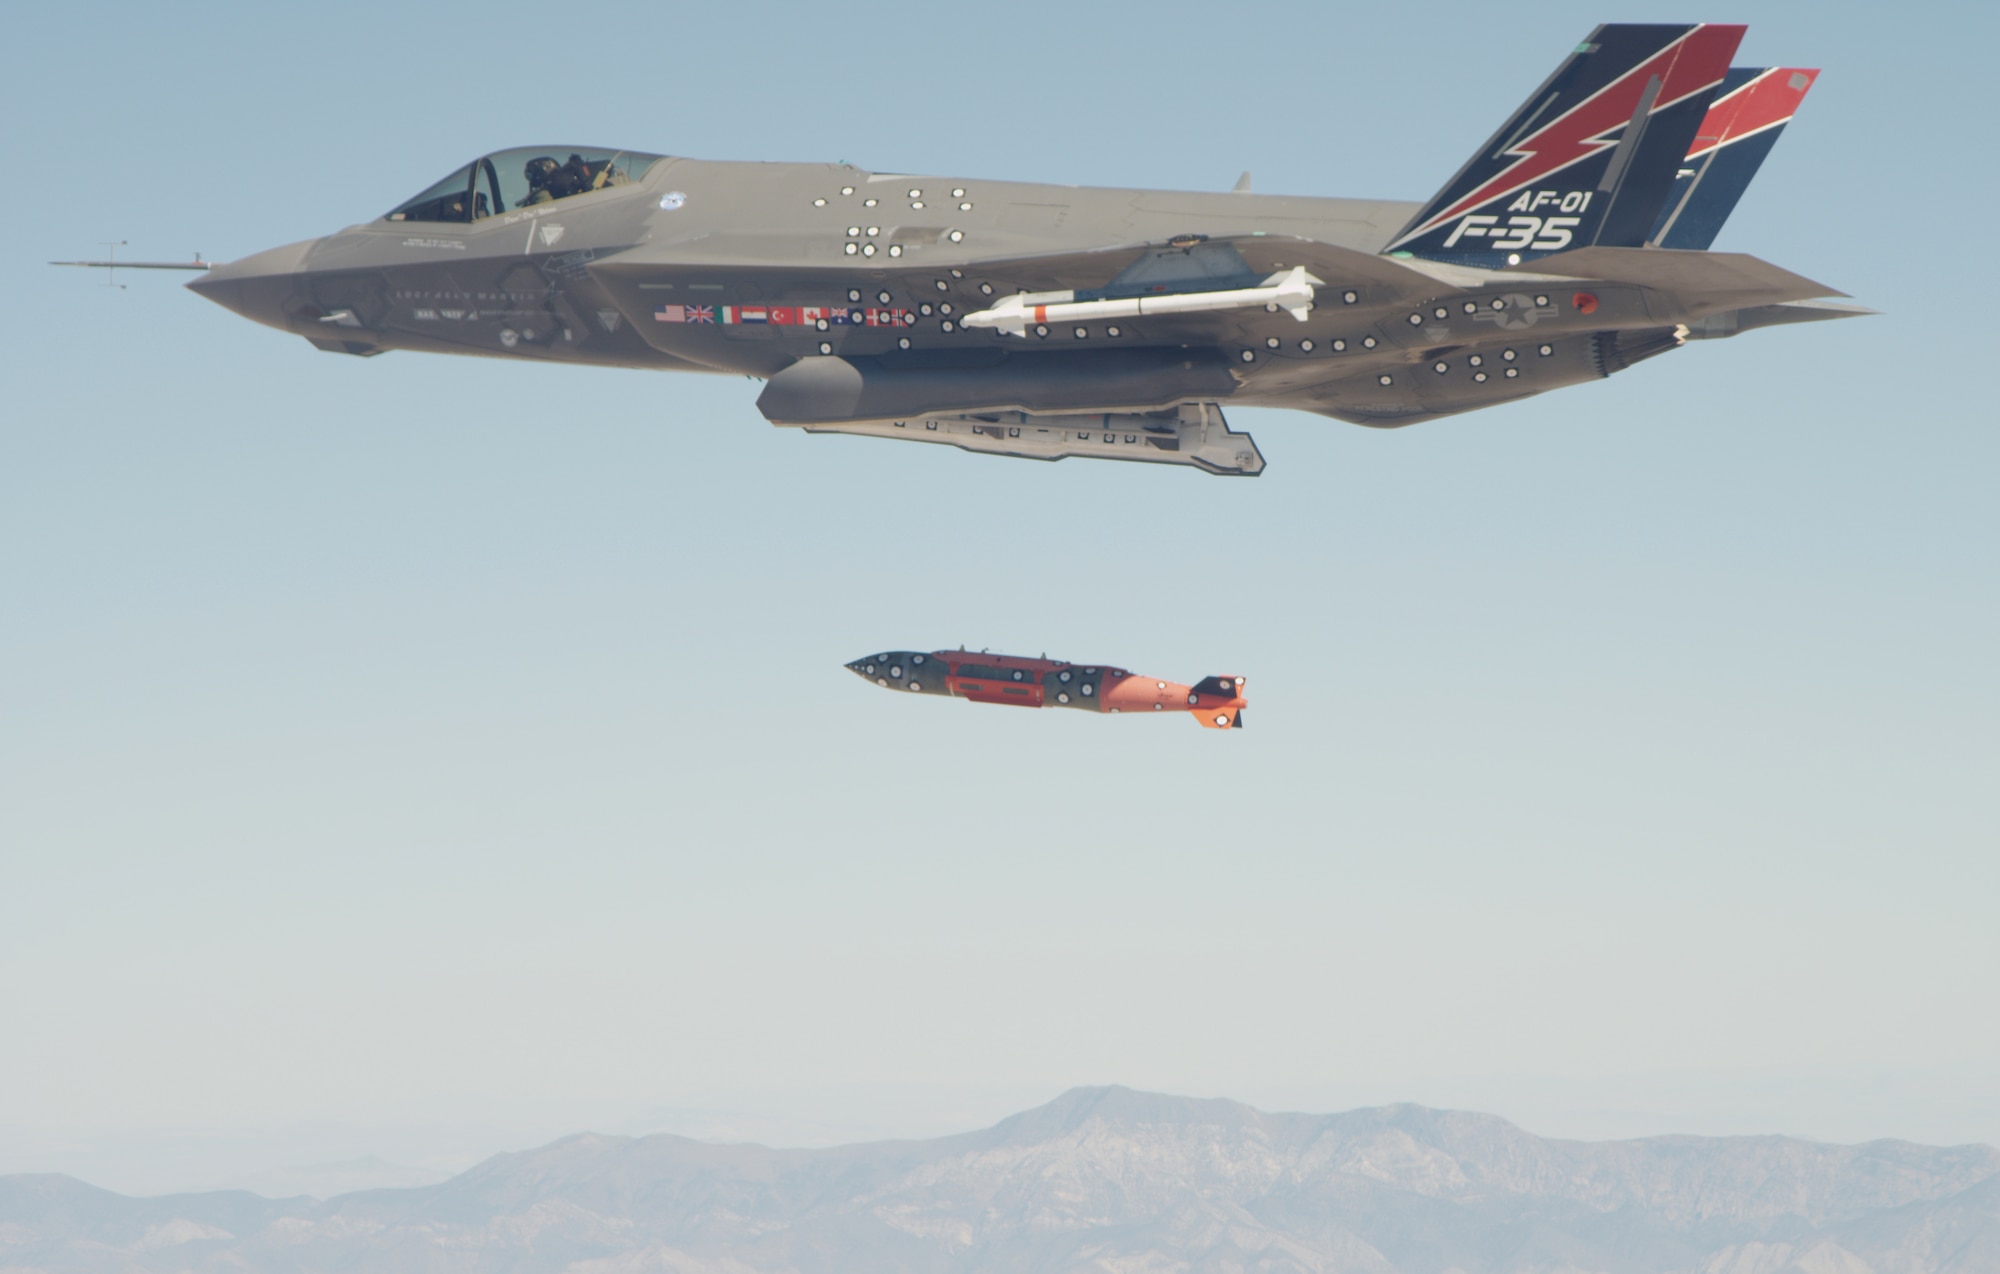 An F-35A conventional takeoff and landing (CTOL) aircraft completed the first in-flight weapons release of a 2,000 pound GBU-31 BLU-109 Joint Direct Attack Munition (JDAM) from a 5th Generation fighter, Oct. 16. (Courtesy photo)

